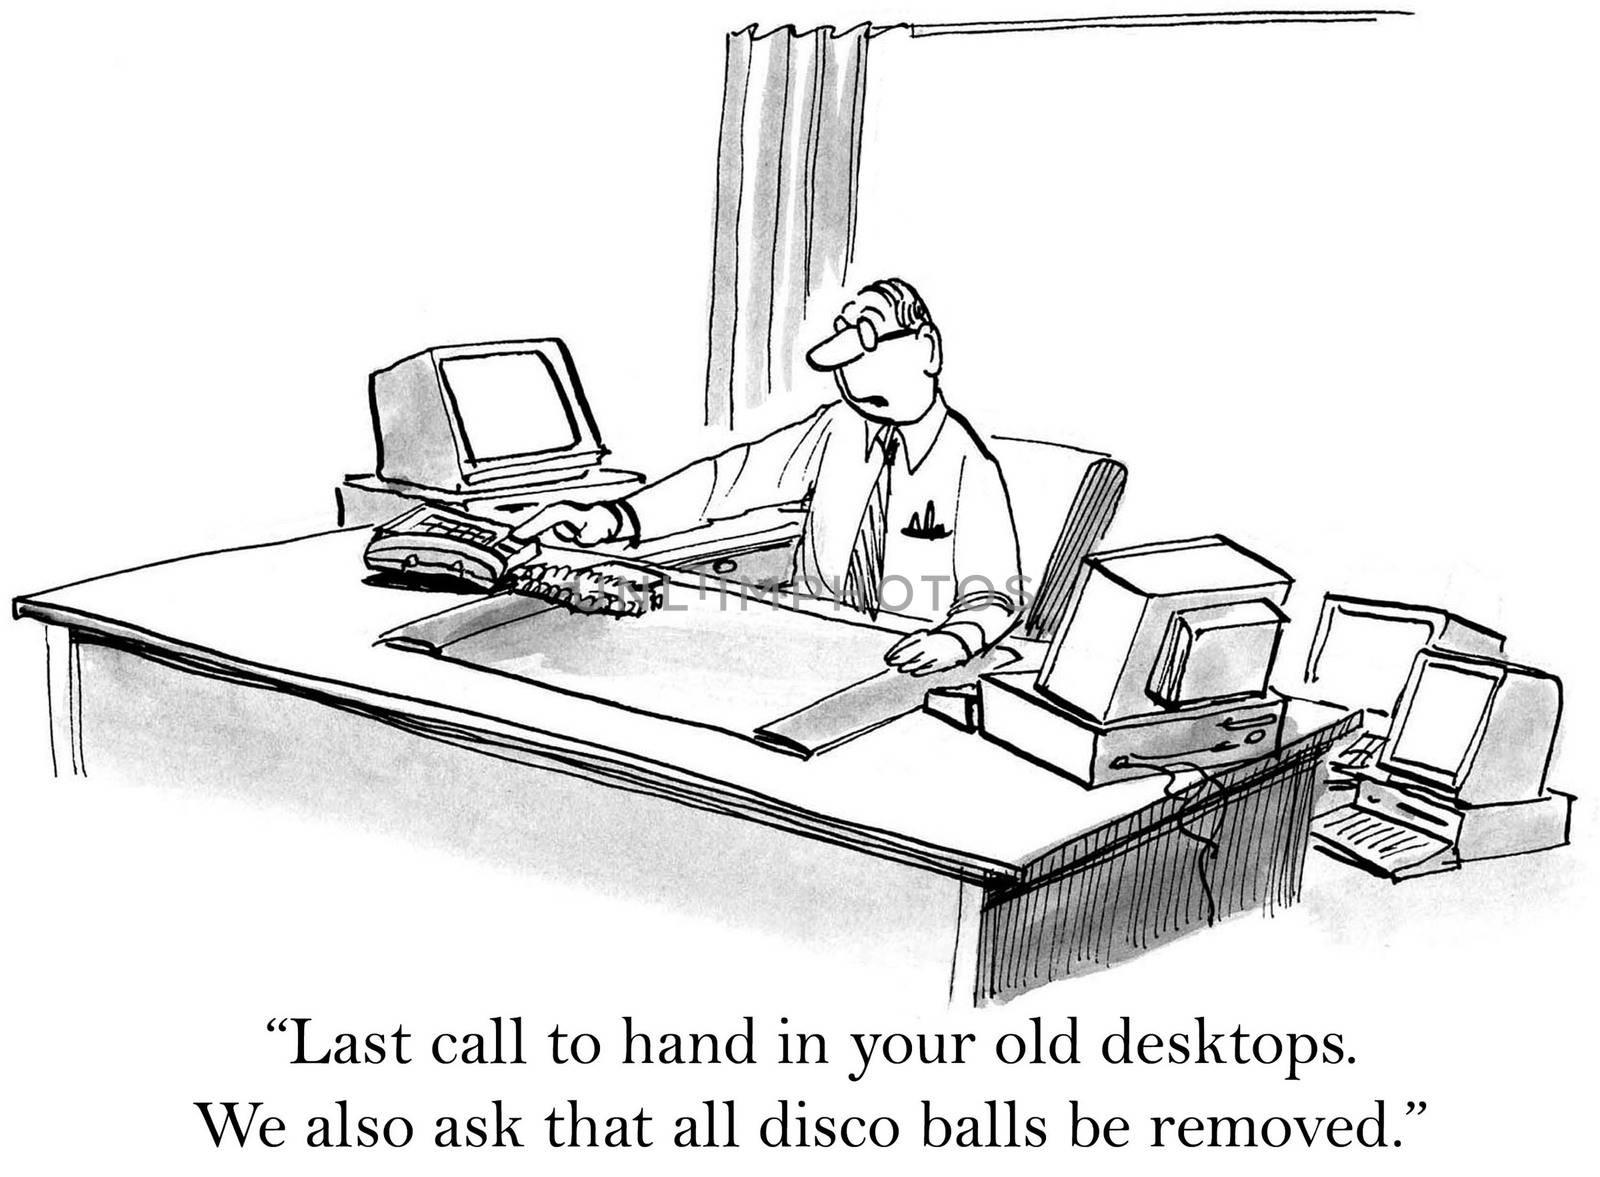 "Last call to hand in your old desktops. We also ask that all disco balls be removed."